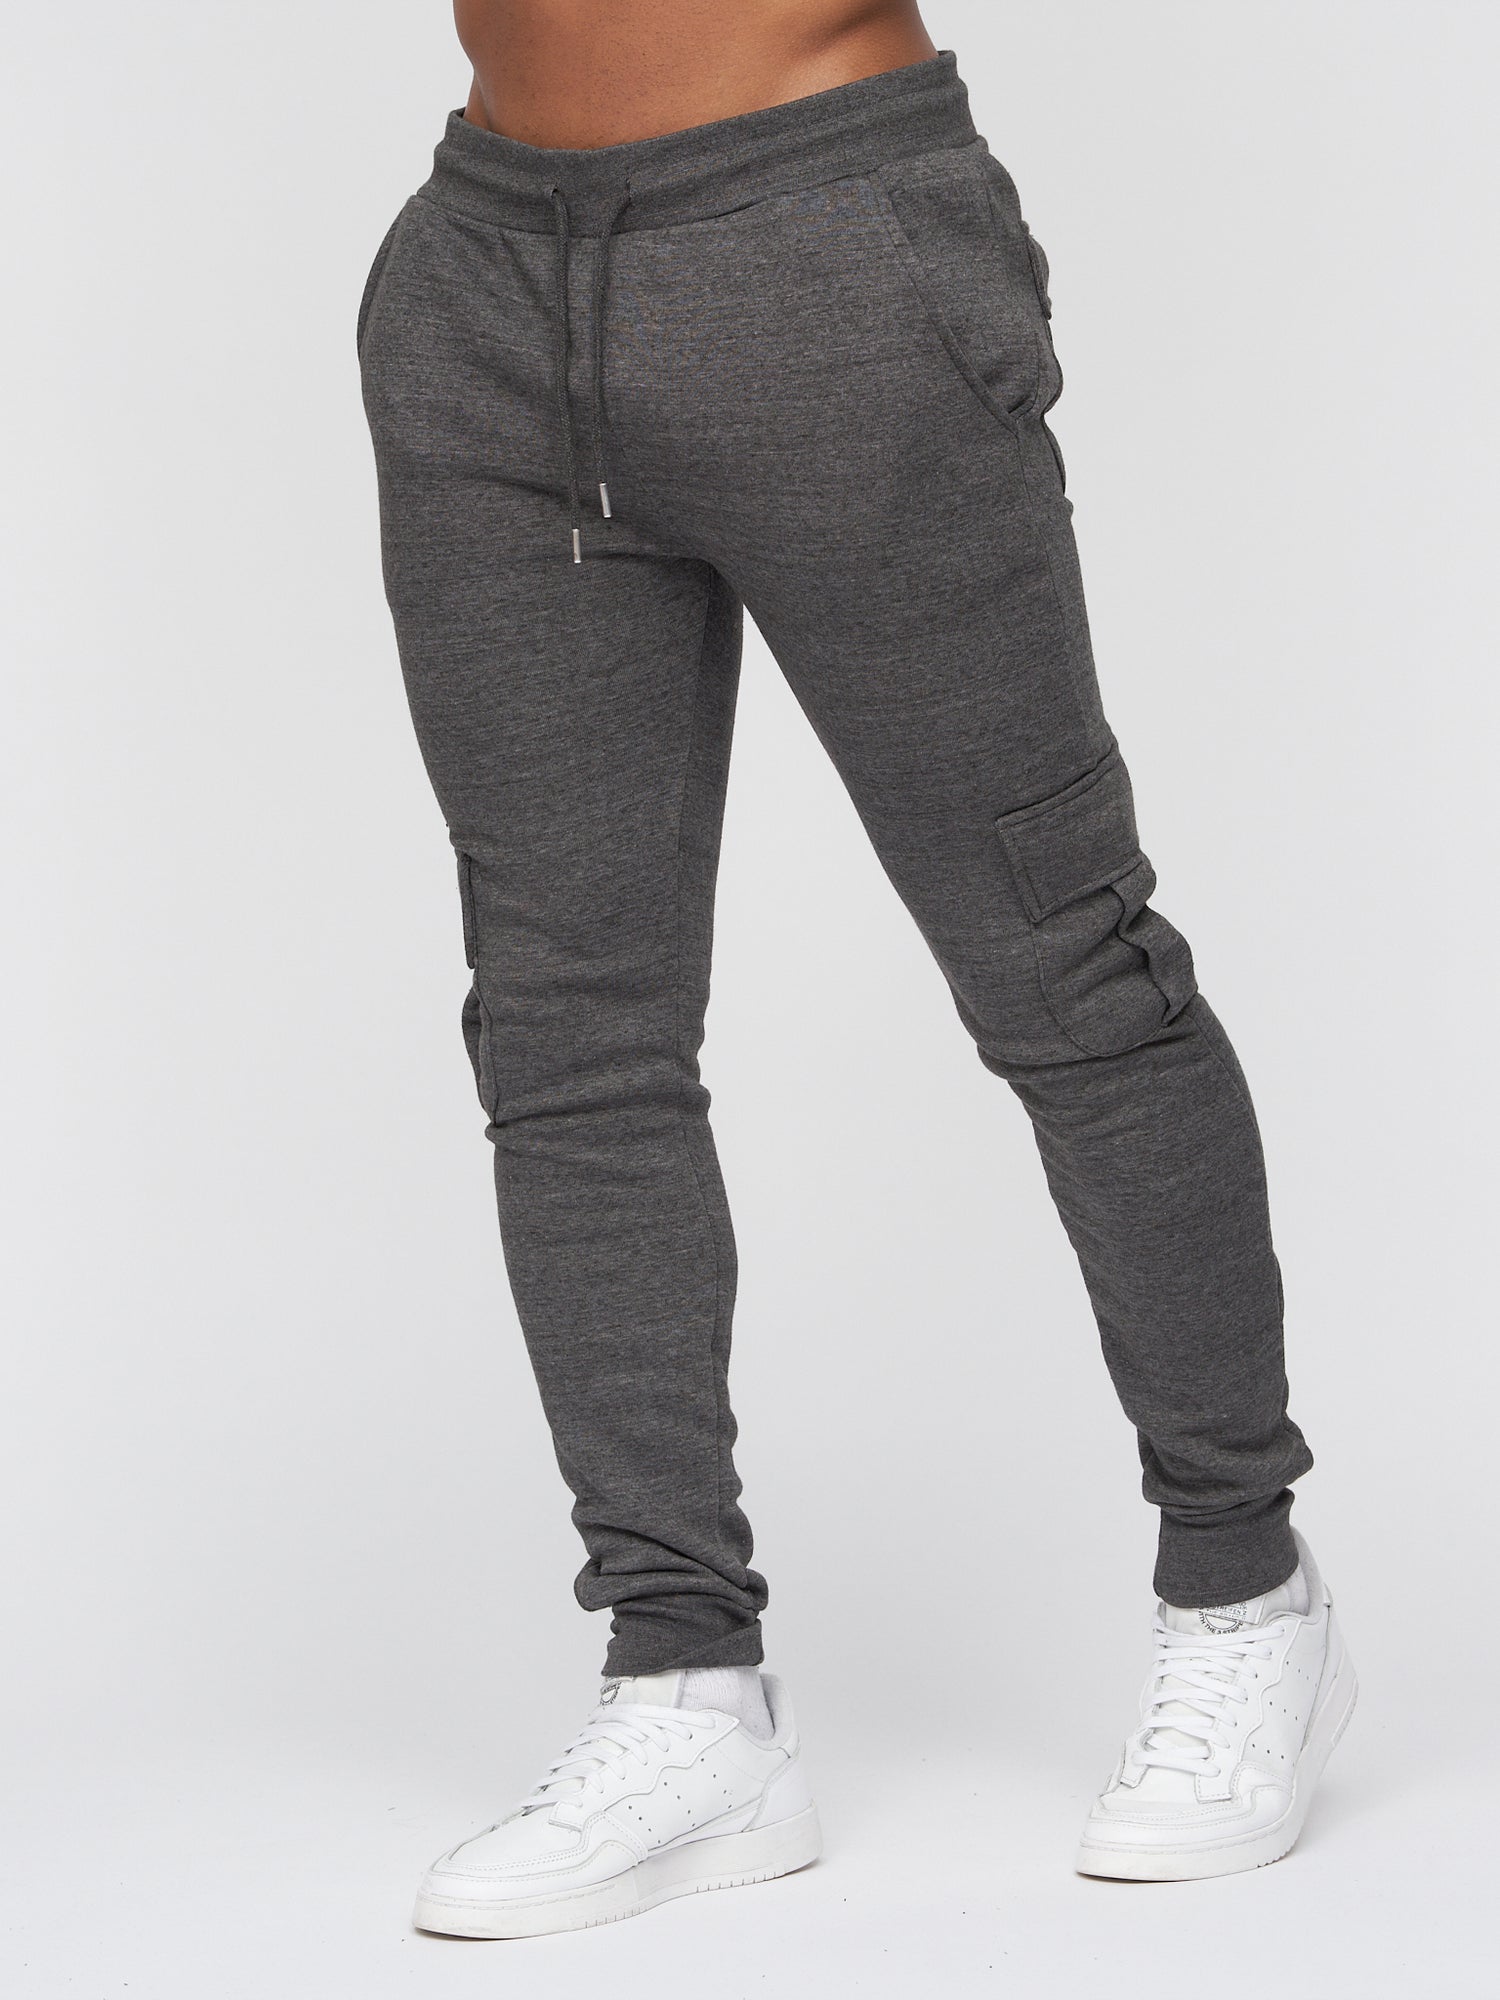 Melbray Crew Sweat & Jogger Set Charcoal Marl – Duck and Cover